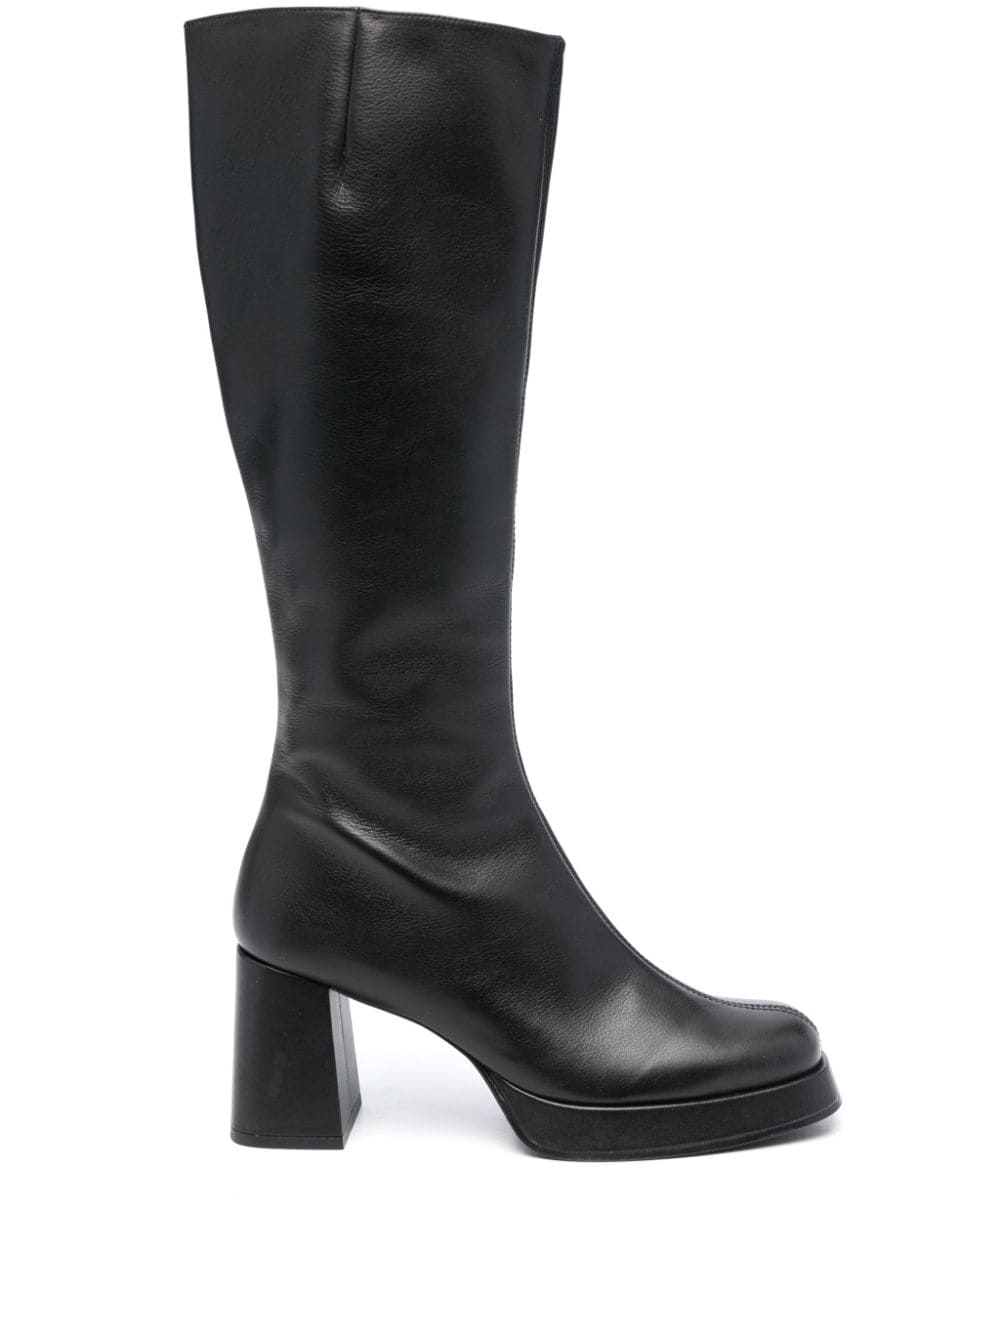 Chie Mihara Kery 100mm leather boots - Black von Chie Mihara